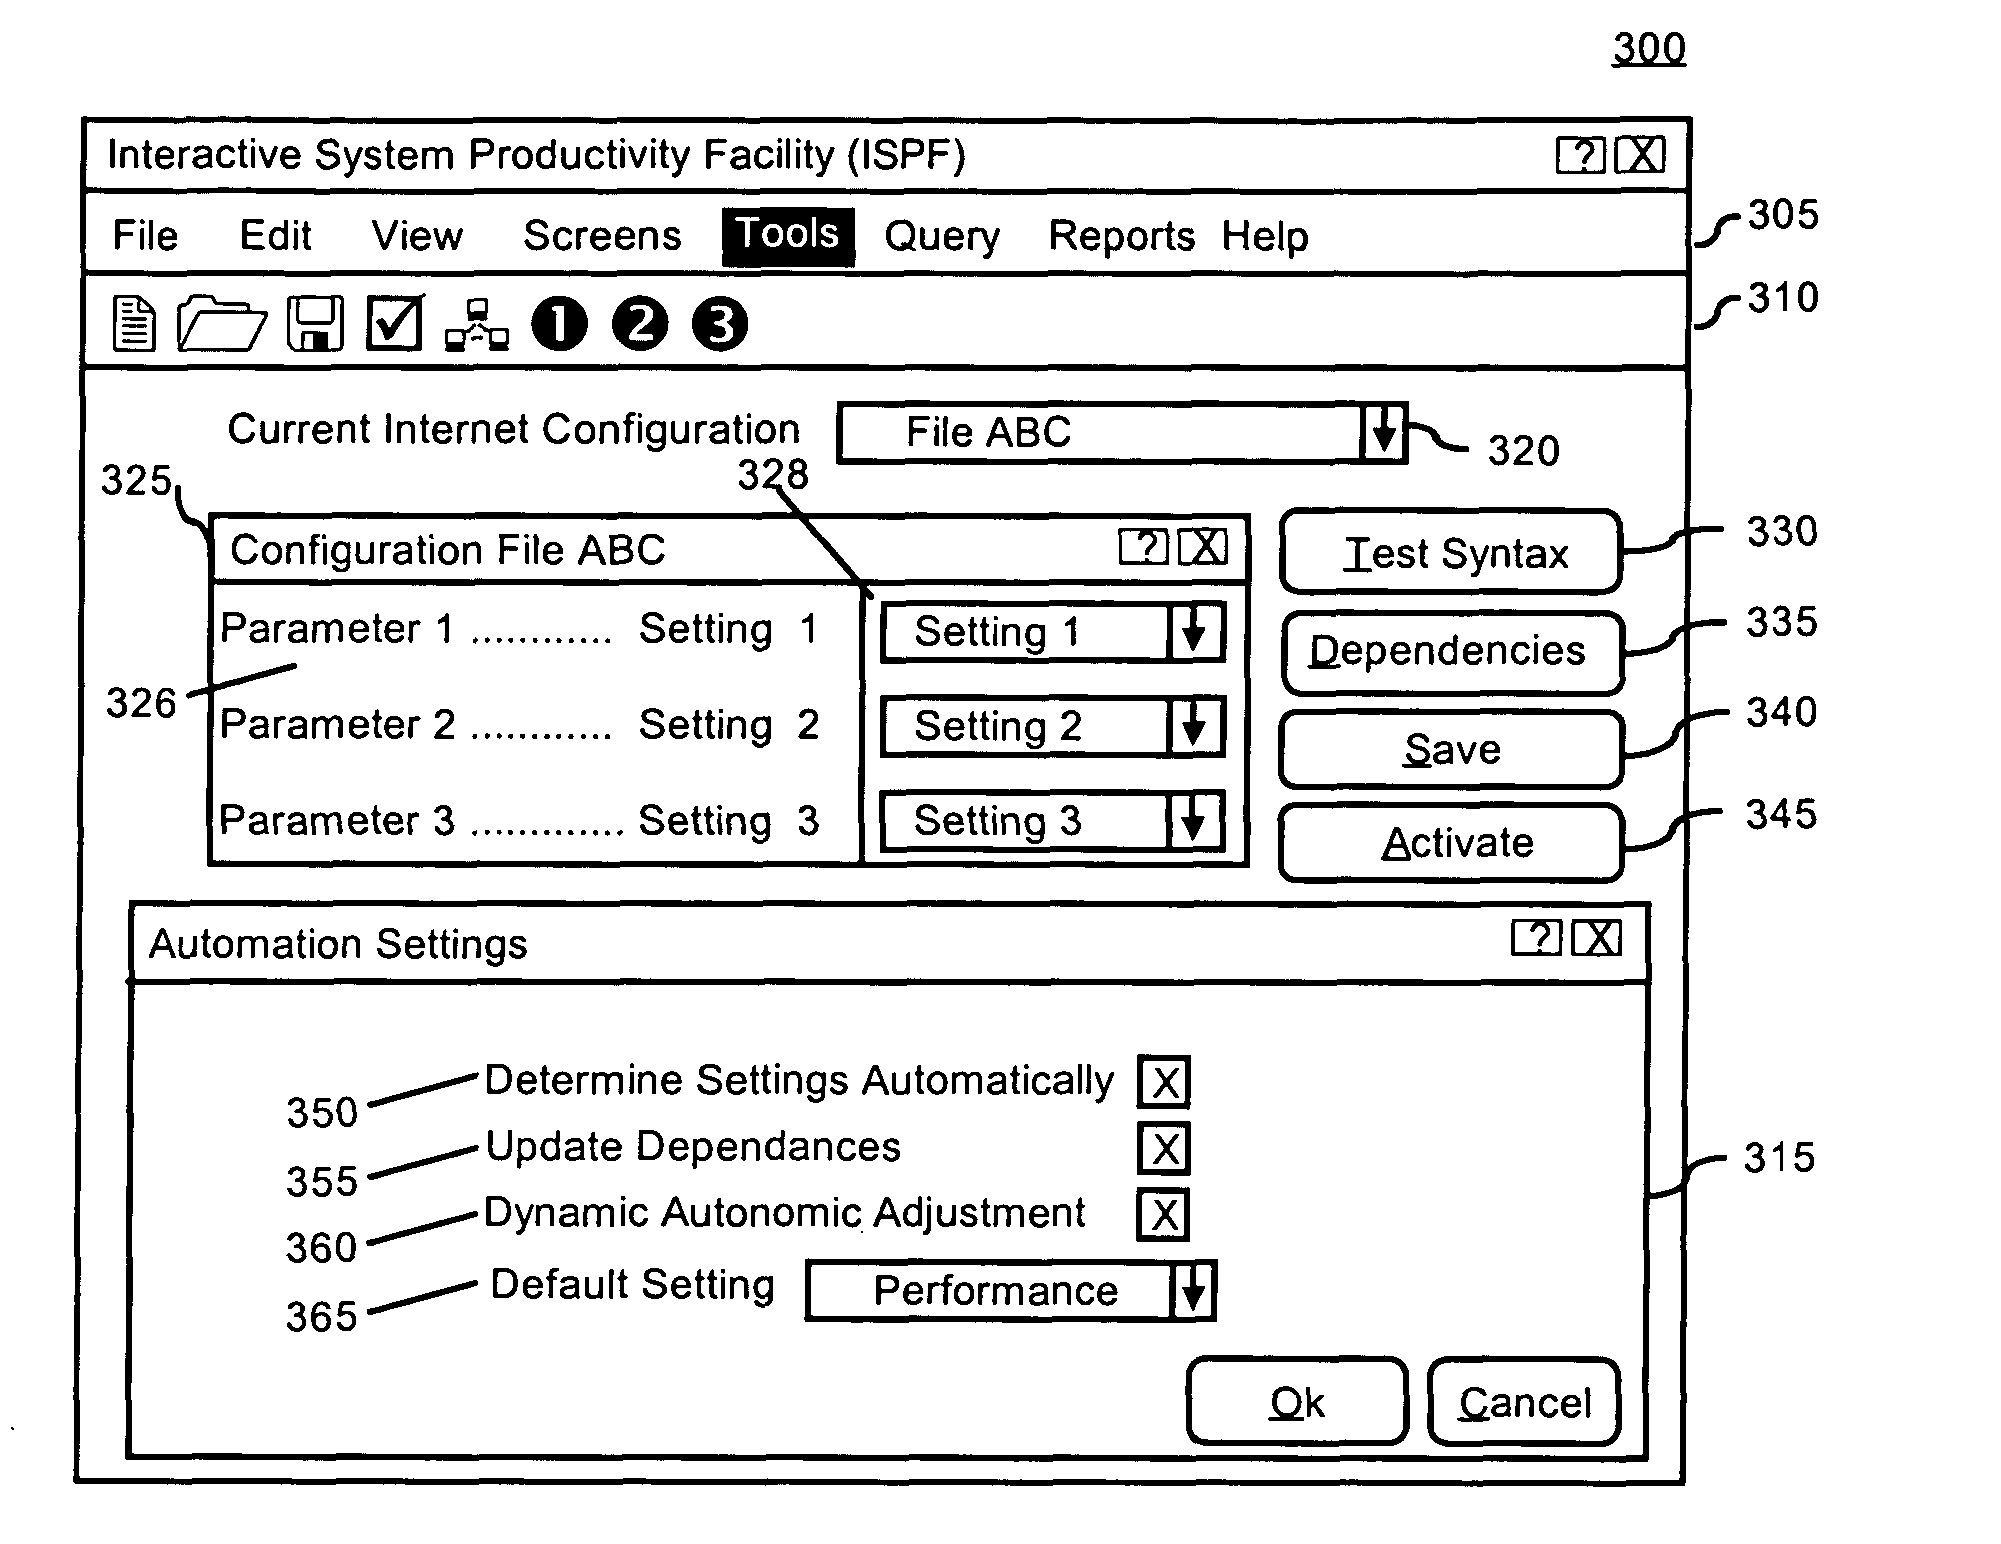 Interface for configuring internet communications on a zSeries computer